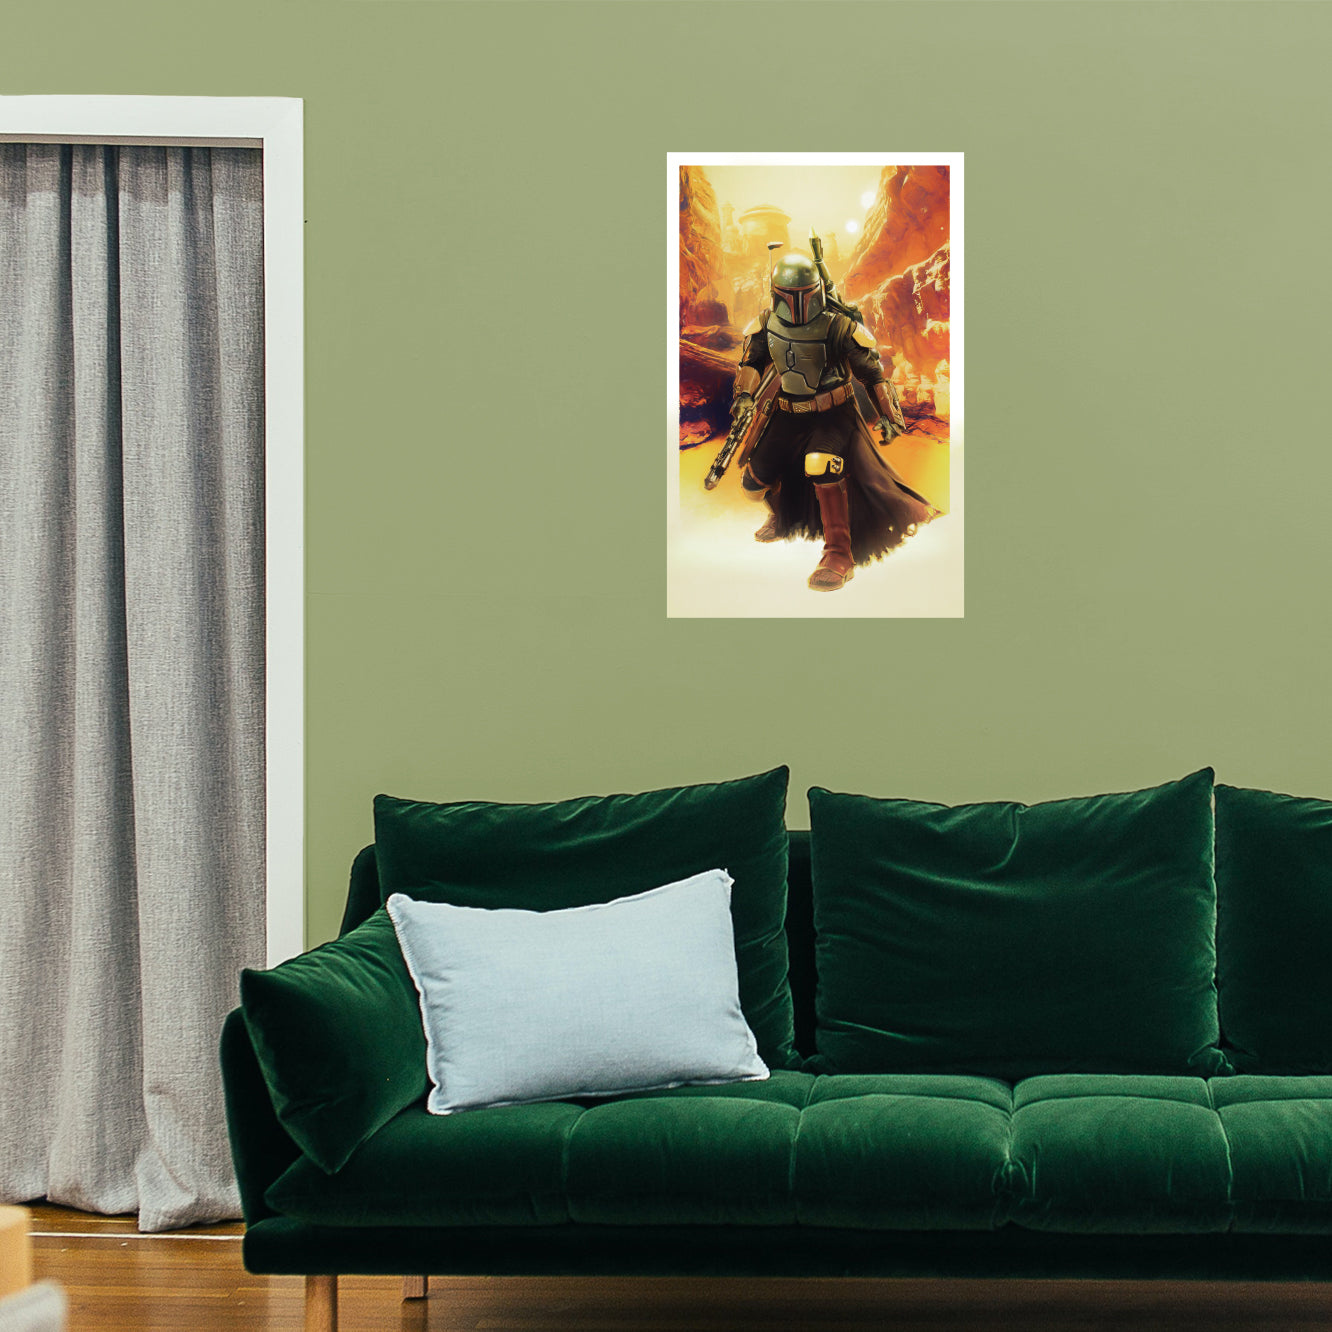 Book of Boba Fett: Boba Fett Mos Eisley Painted Poster - Officially Licensed Star Wars Removable Adhesive Decal